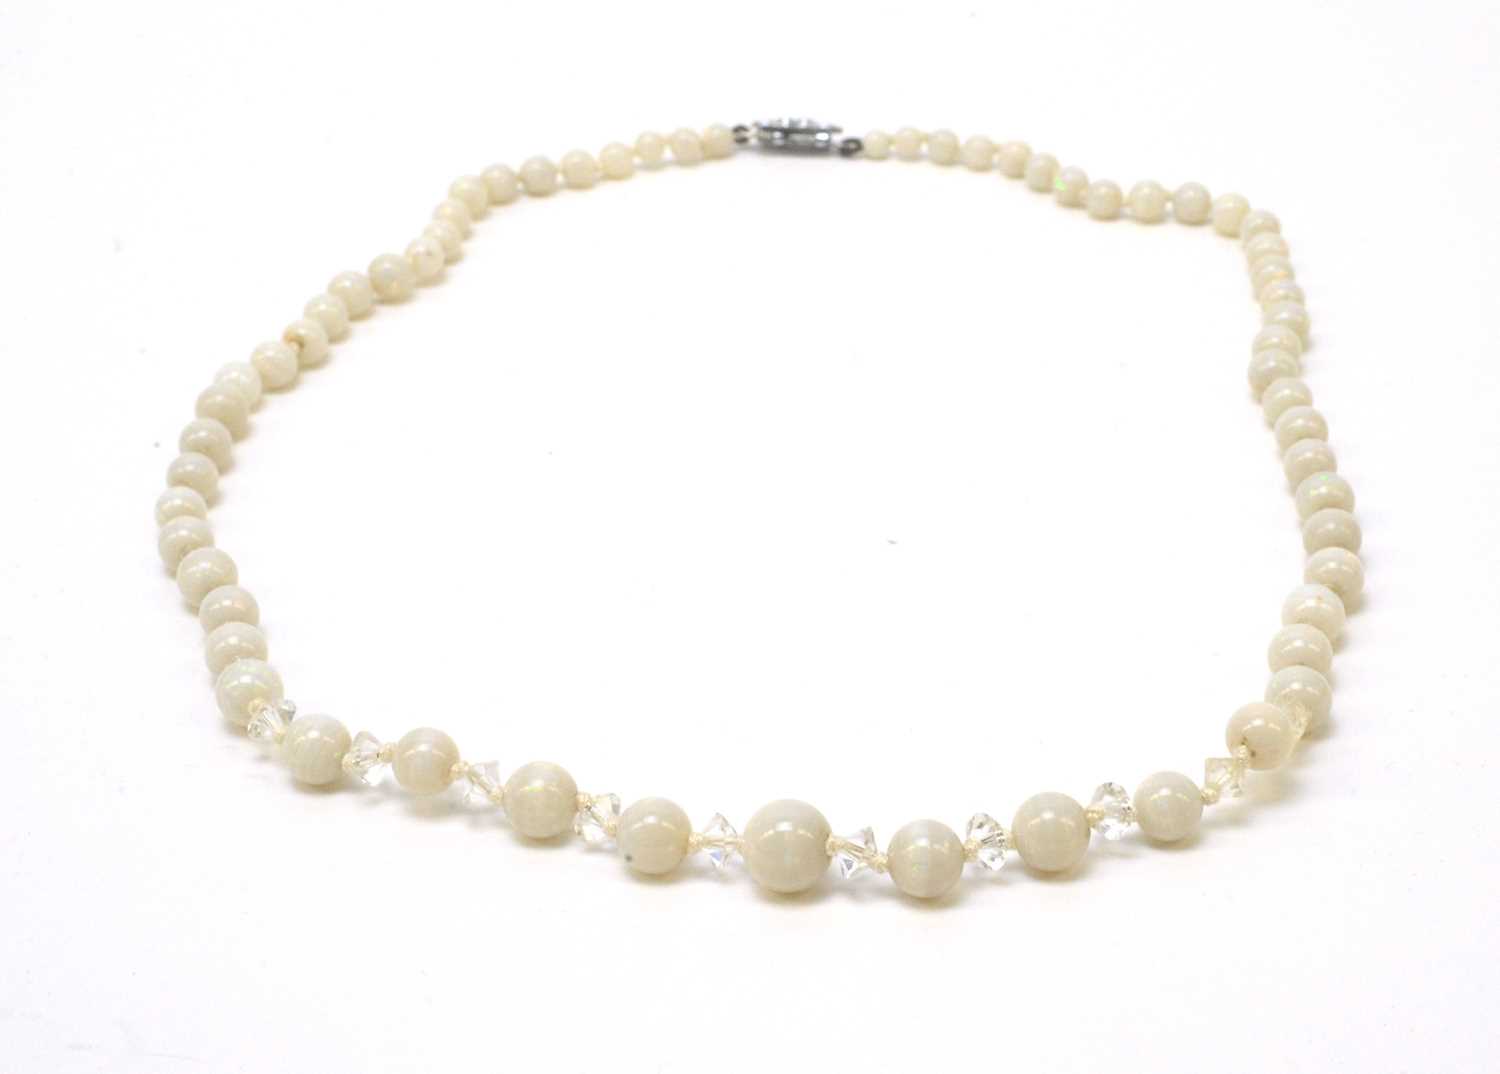 Lot 179 - A white opal bead and crystal necklace.